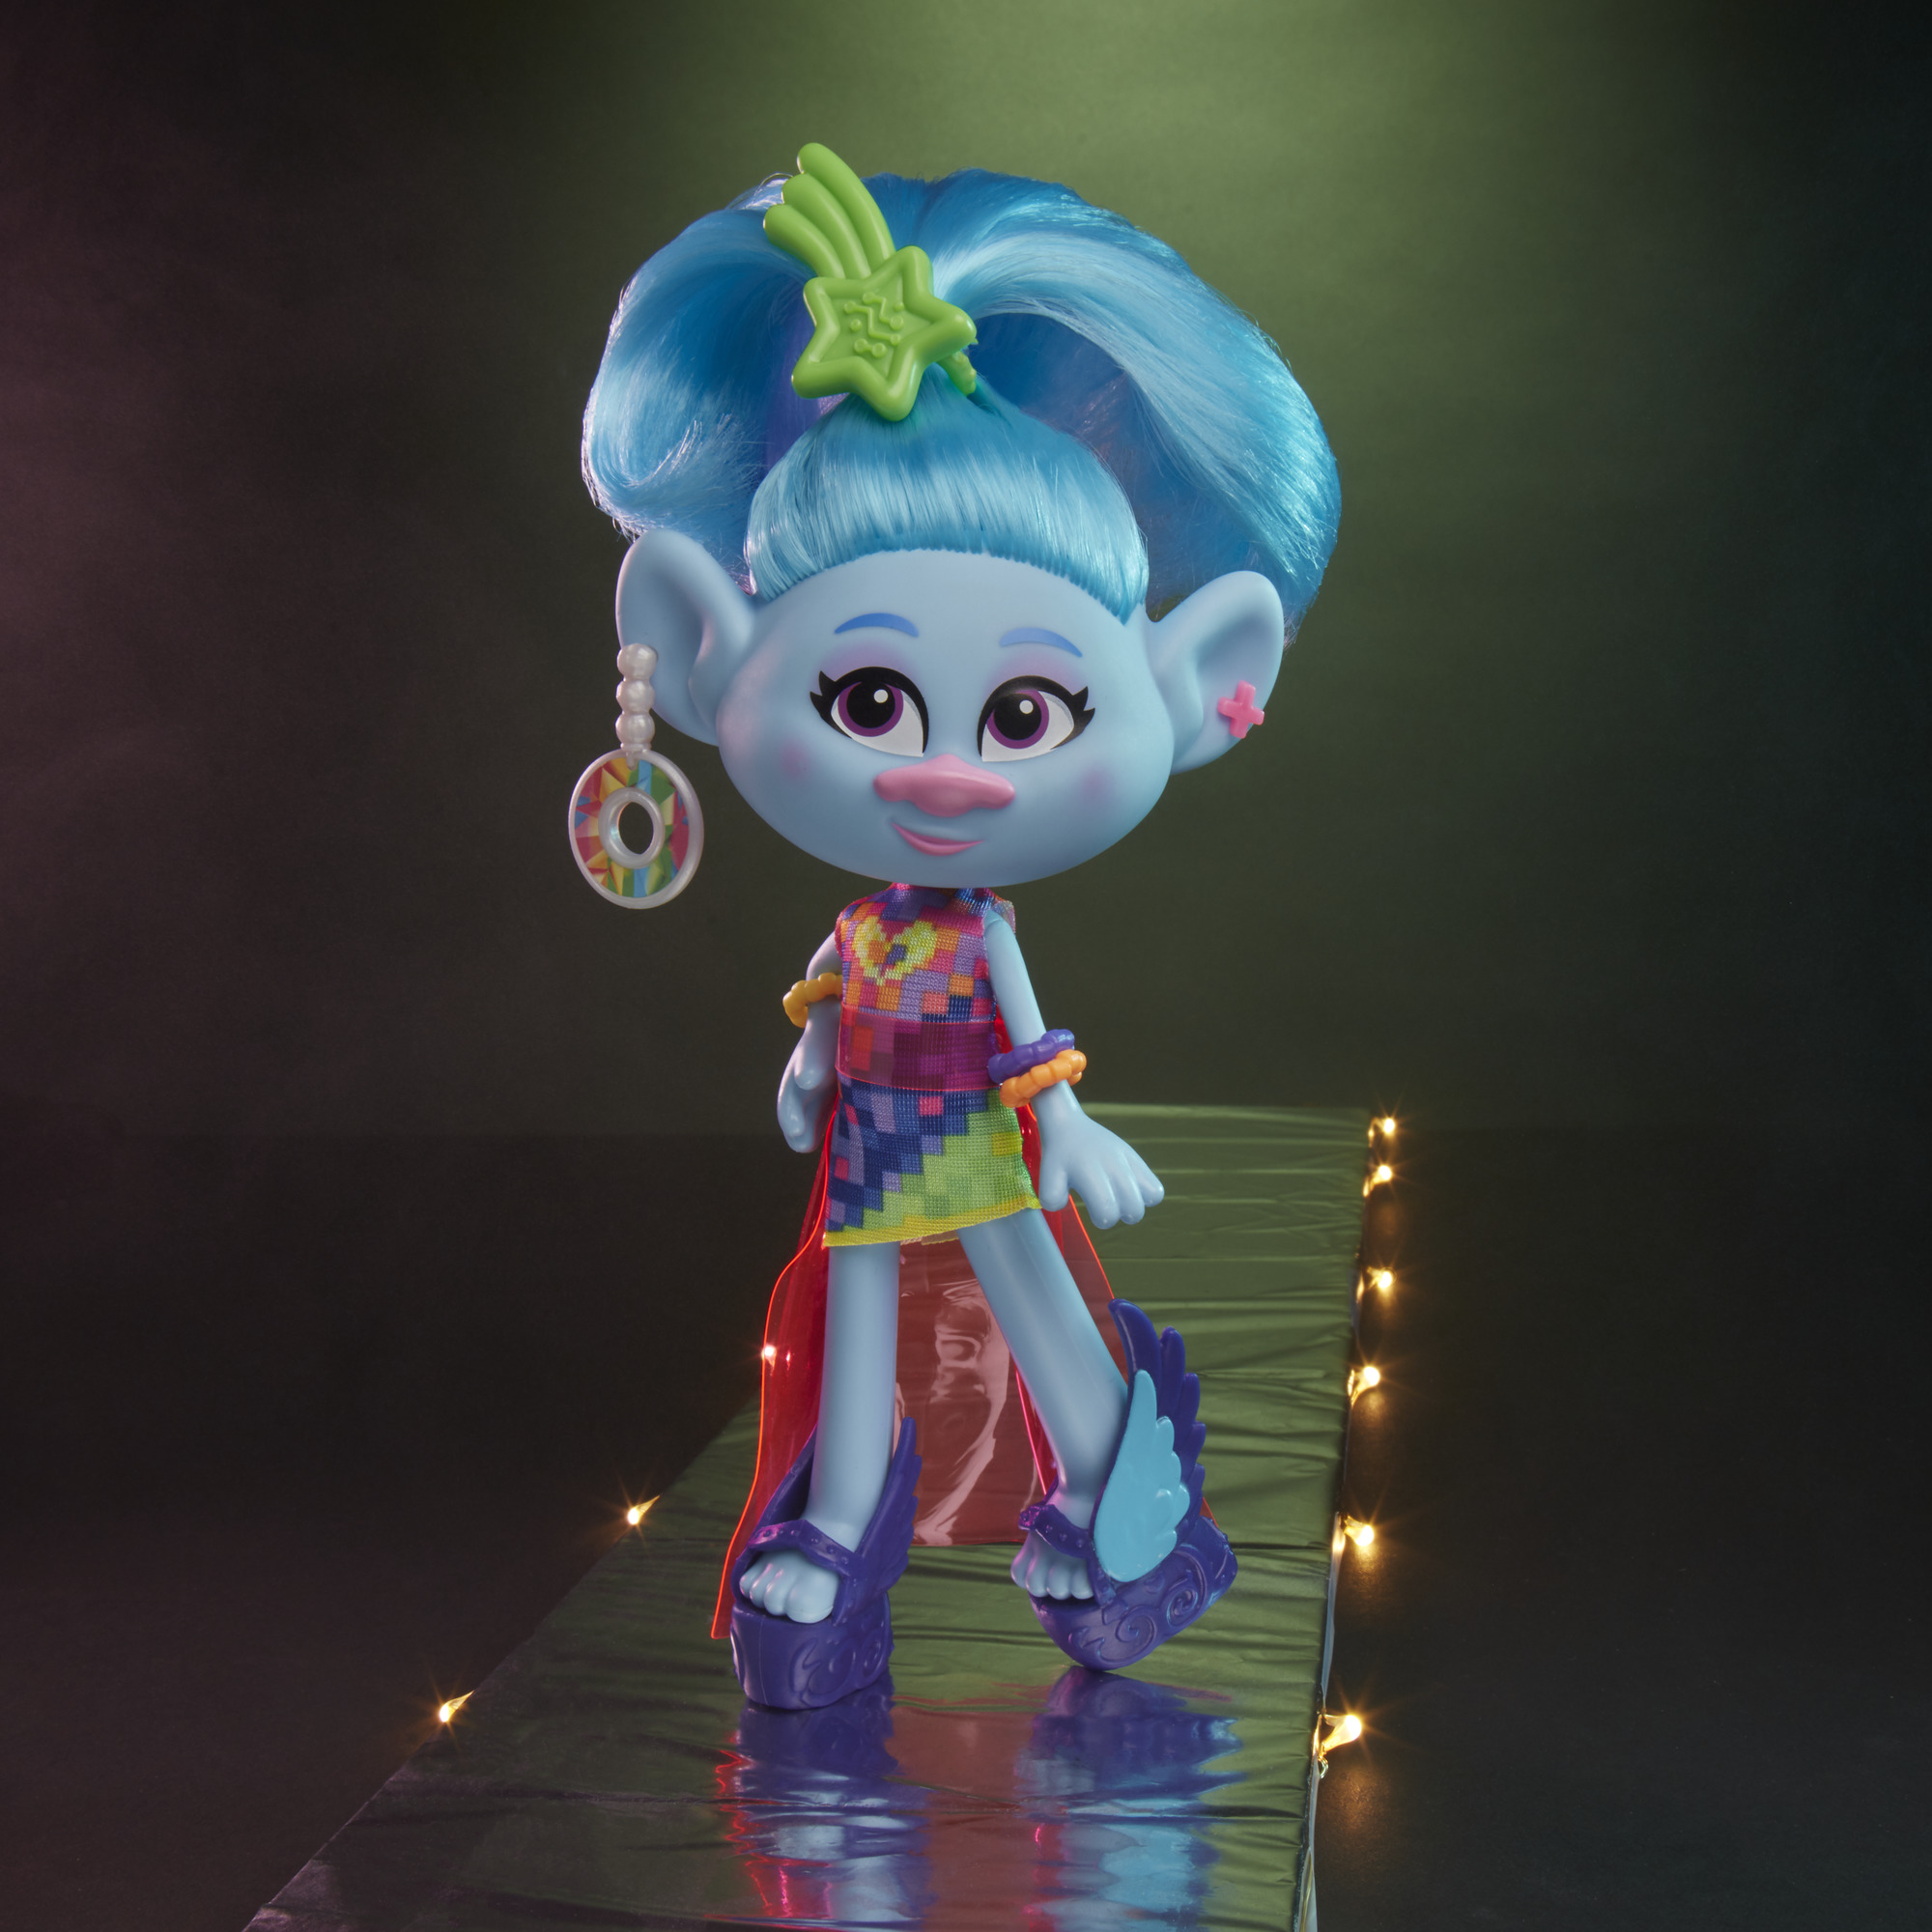 DreamWorks Trolls Glam Chenille Fashion Doll, Includes Dress and Shoes - image 4 of 11